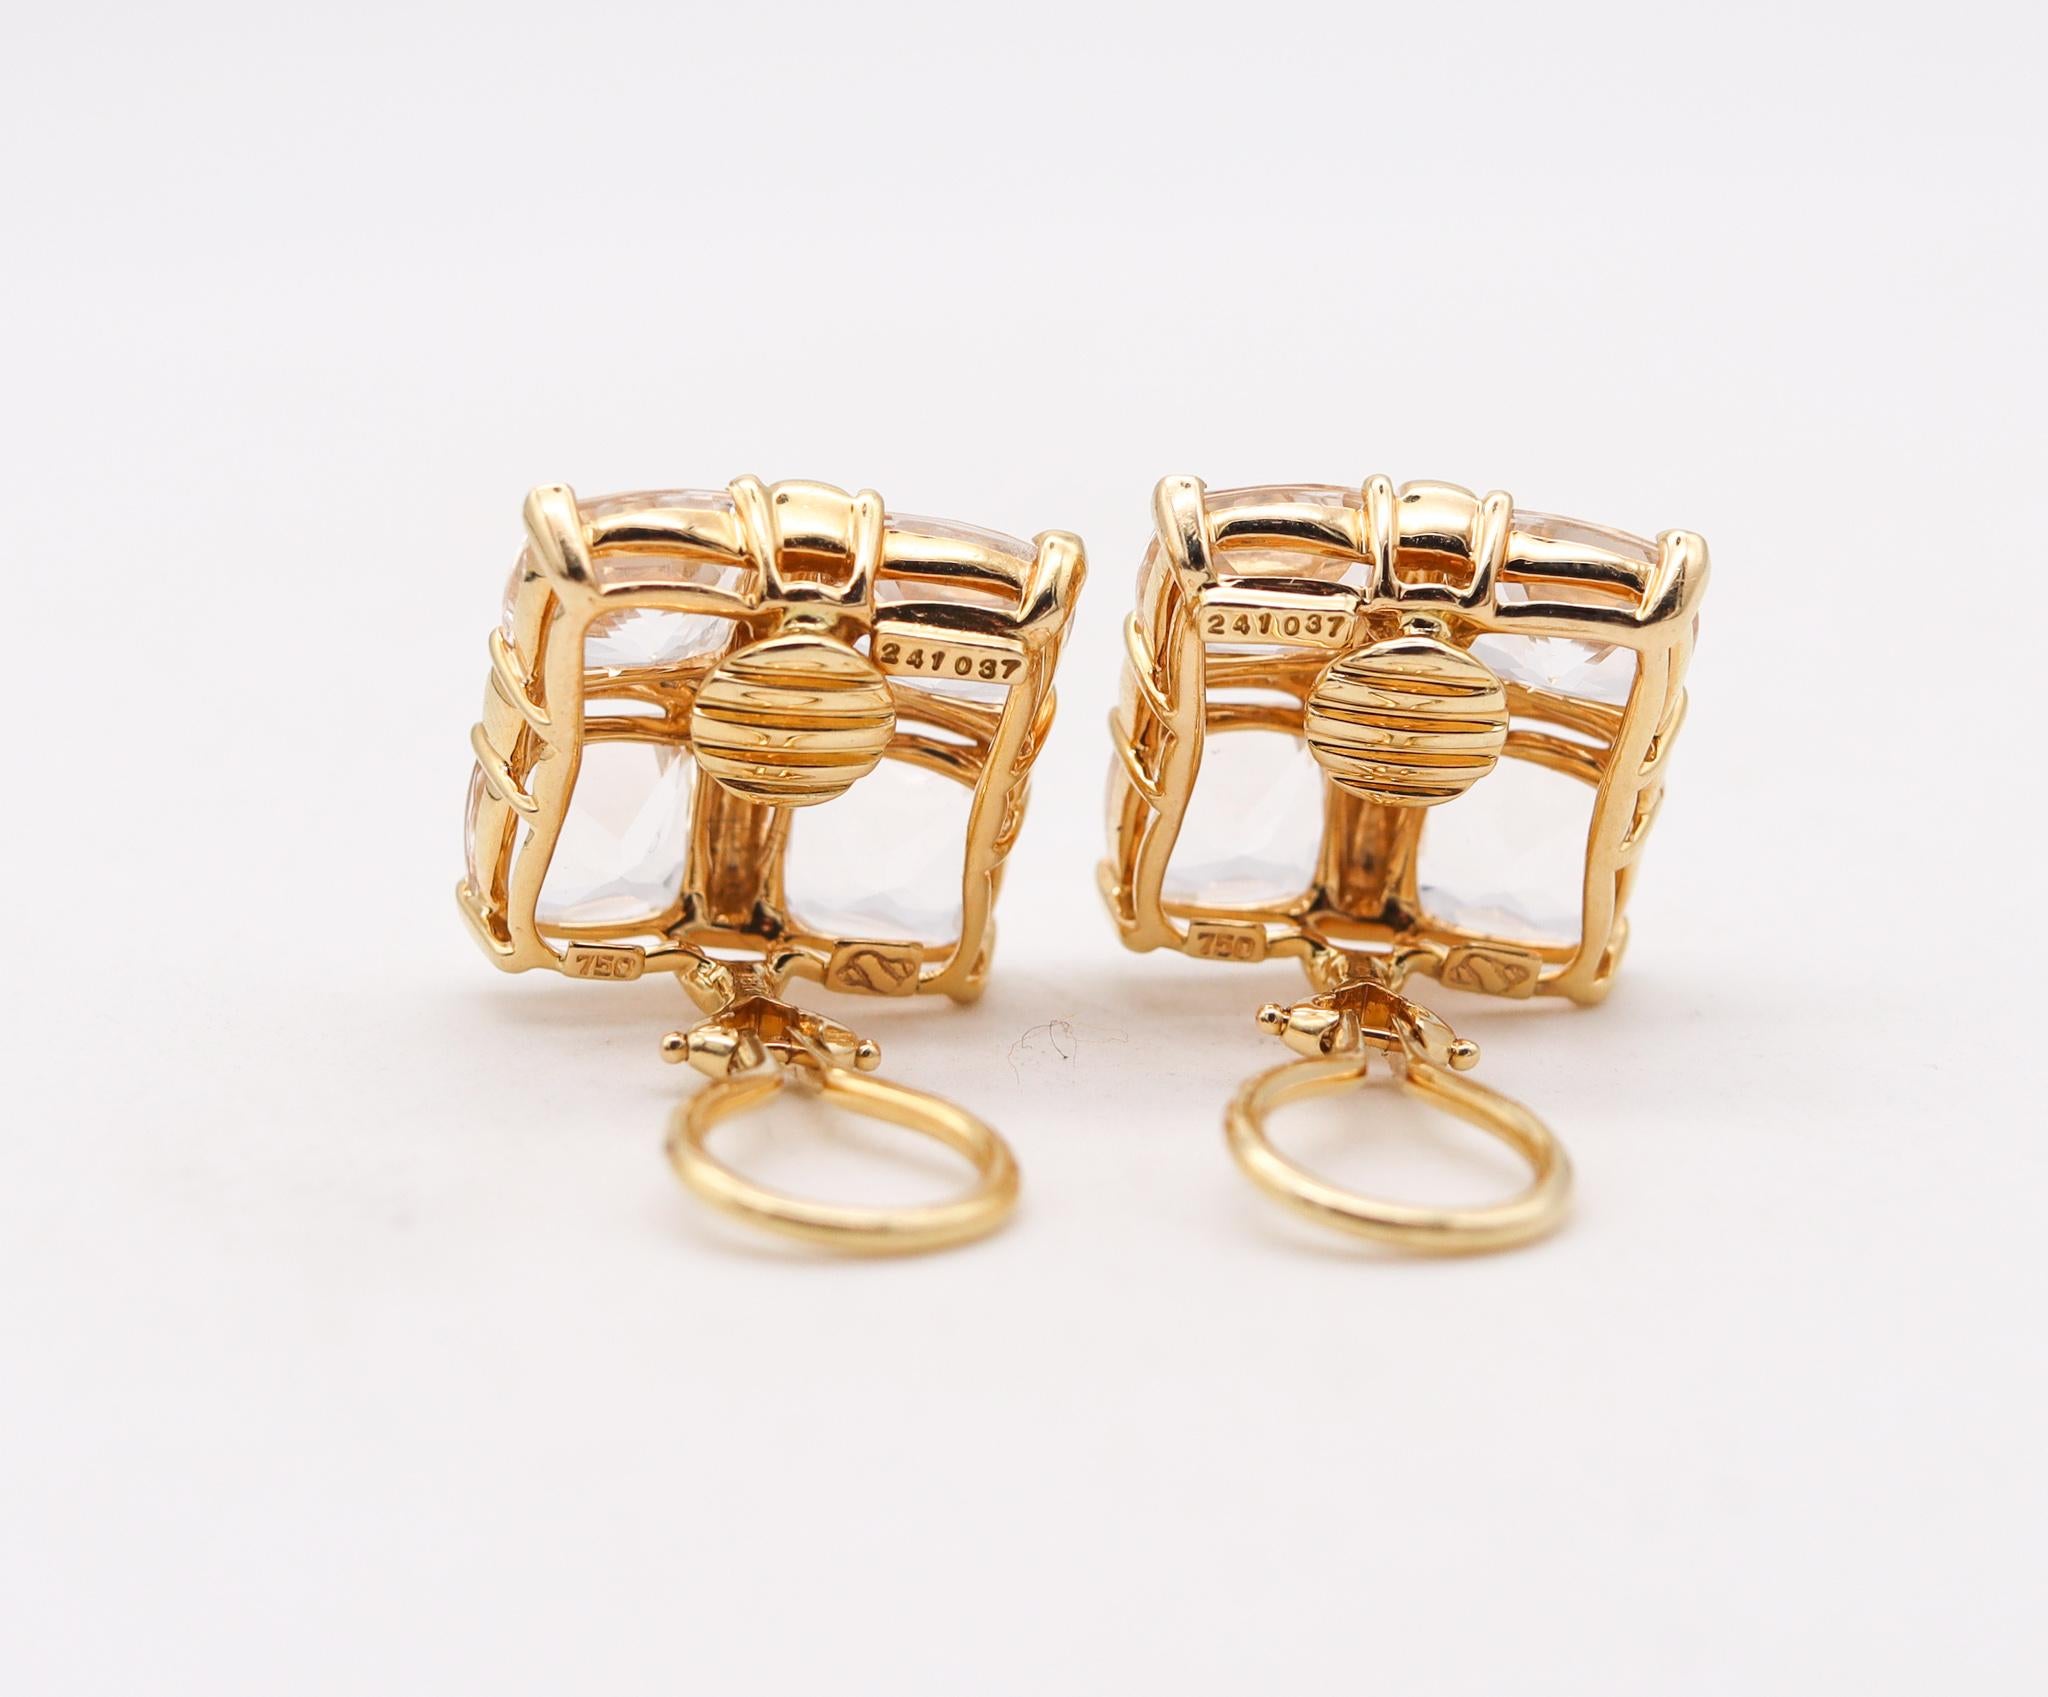 Modernist Seaman Schepps Squared Clips Earrings 18Kt Gold With 24.20 Cts Diamonds & Quartz